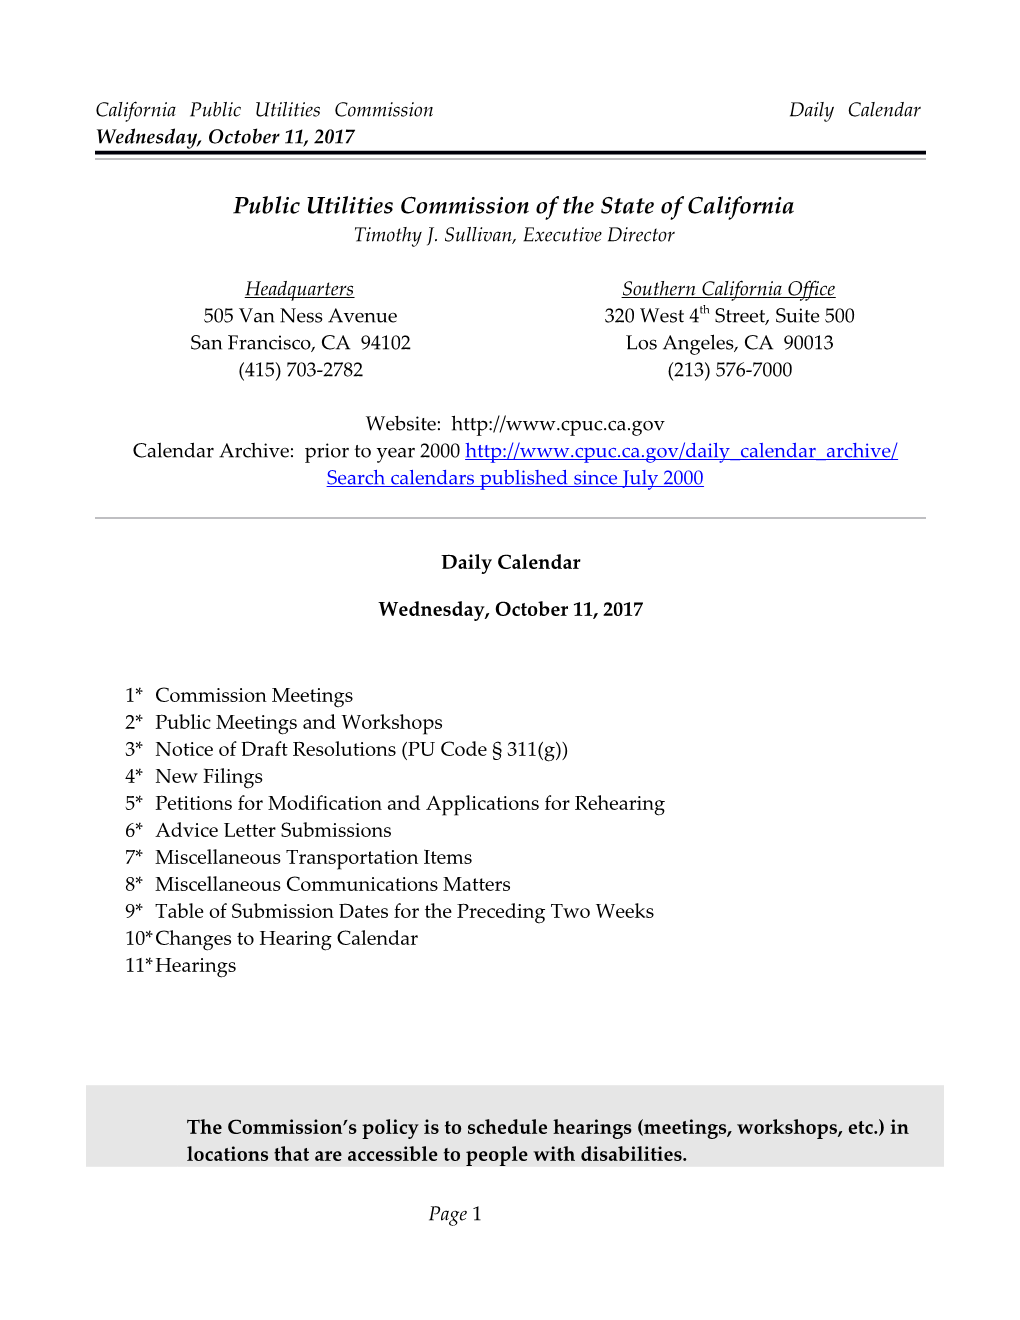 California Public Utilities Commission Daily Calendar Wednesday, October 11, 2017